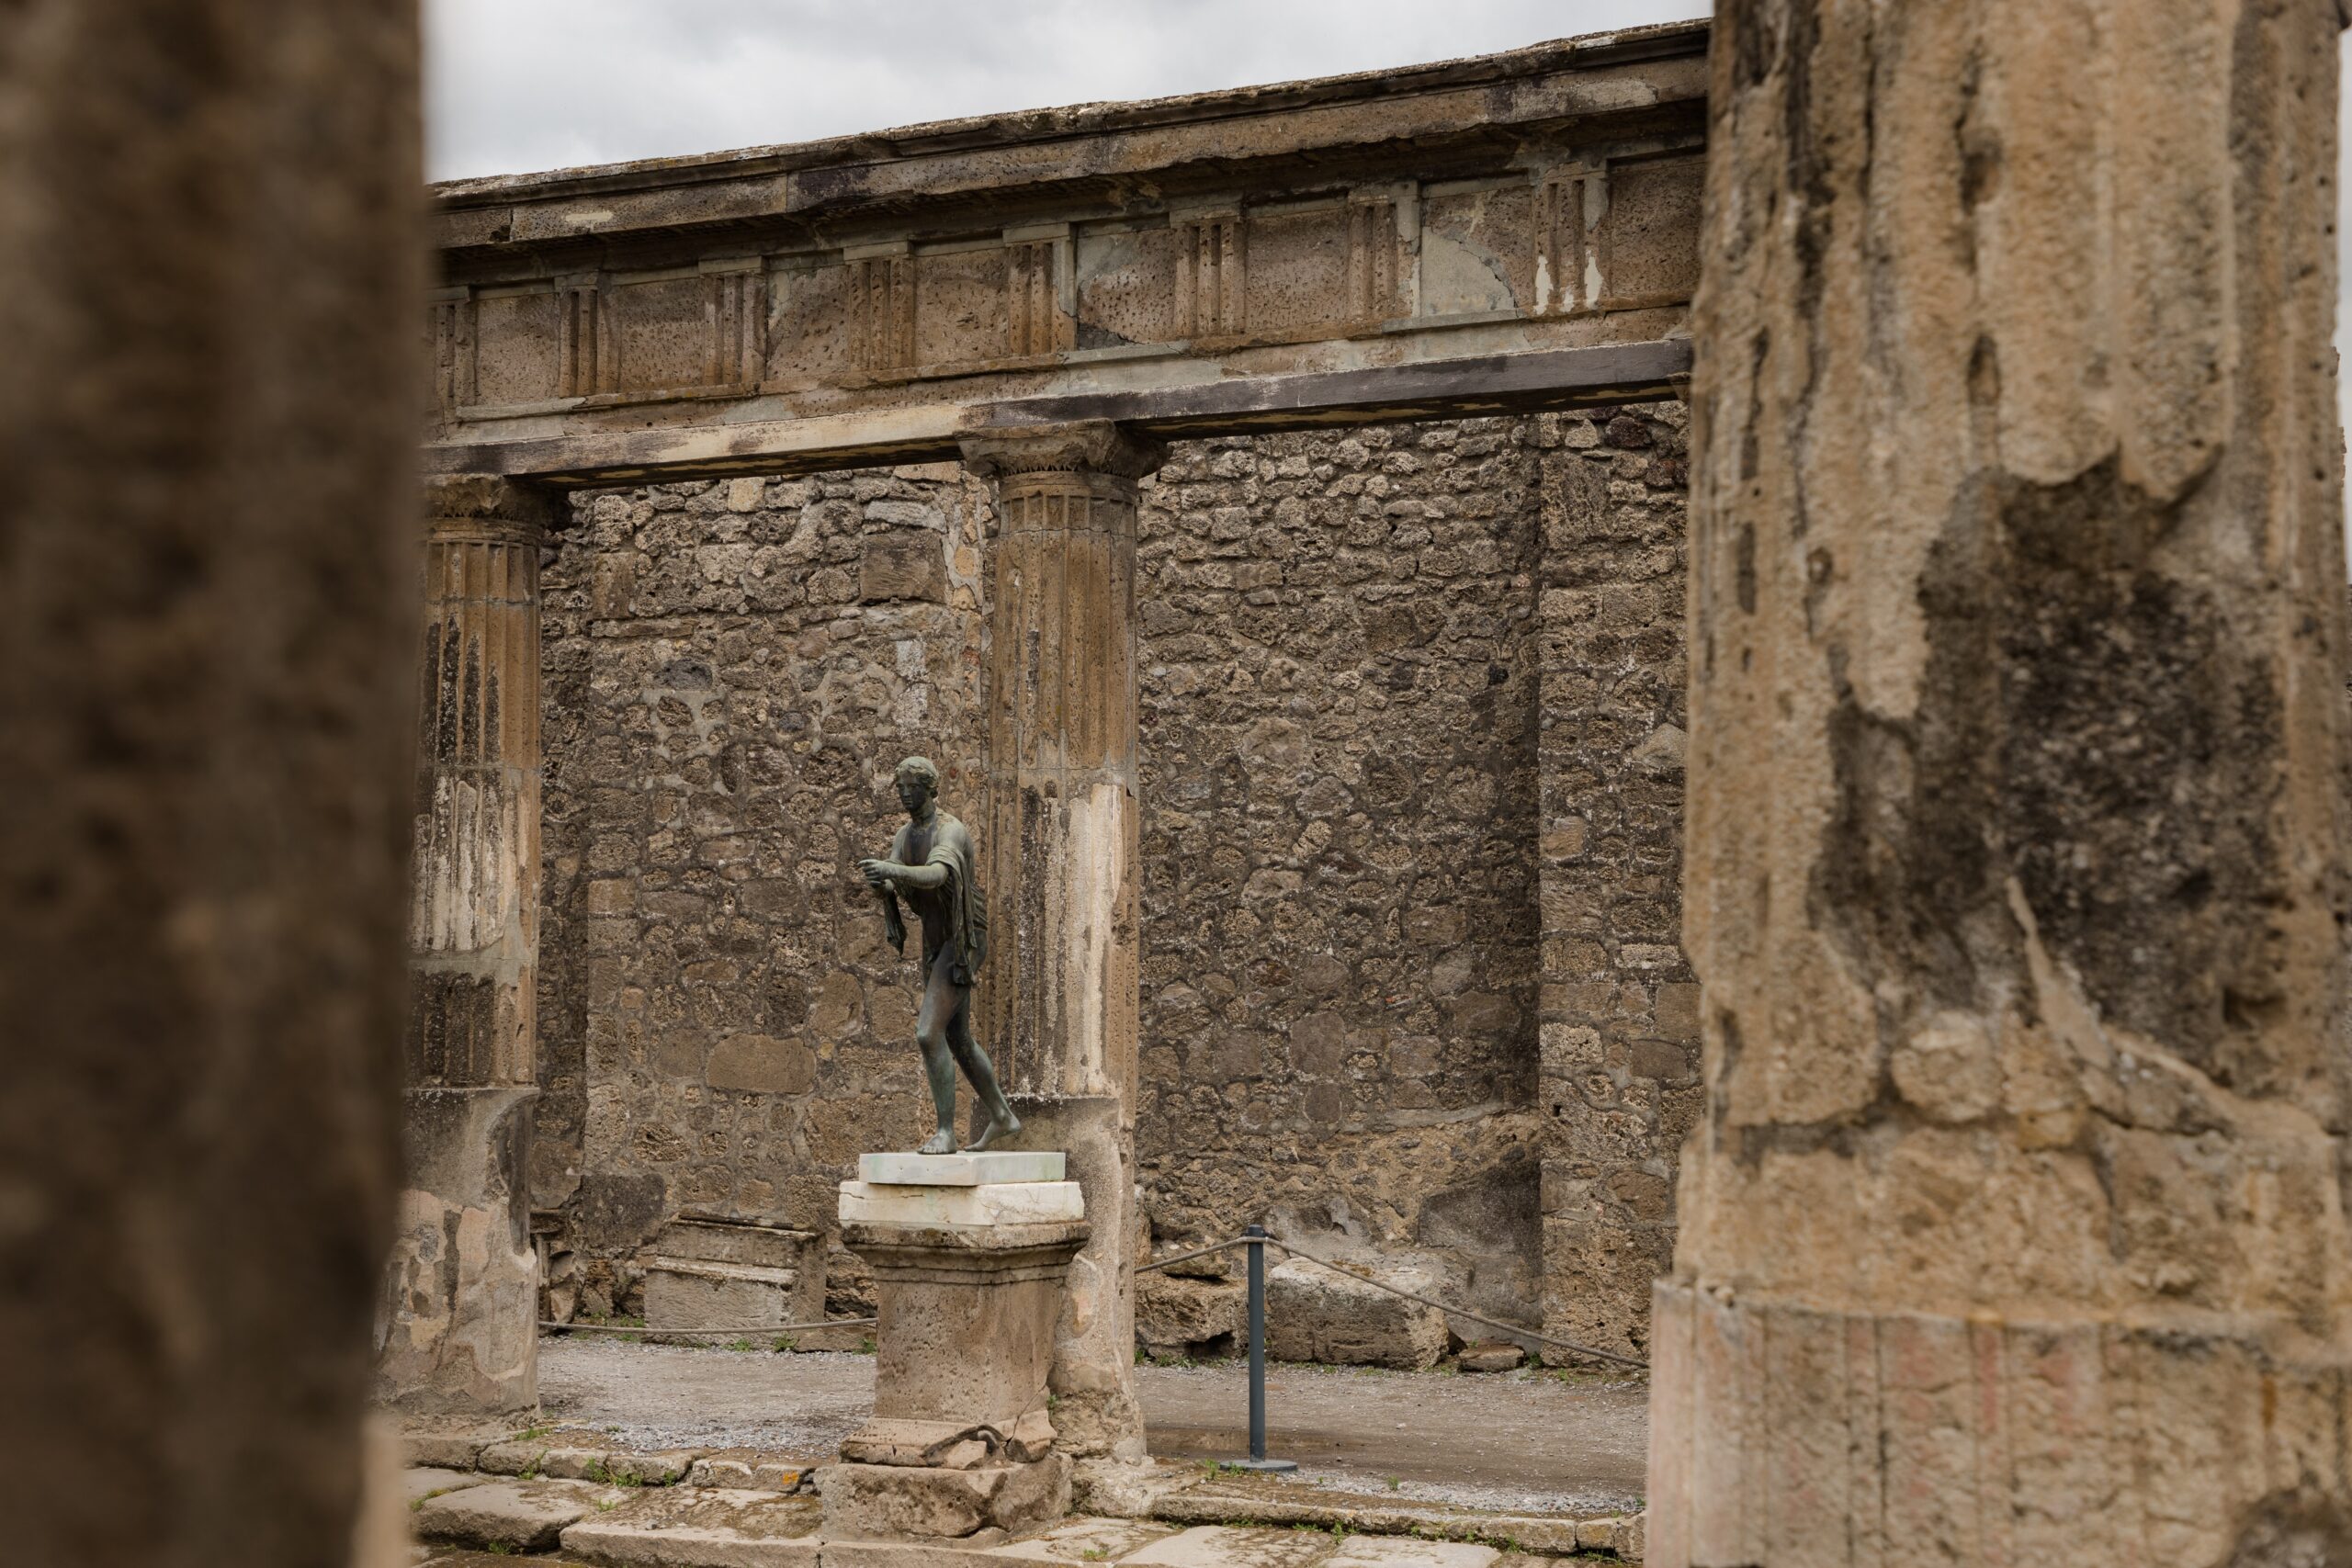 Pompeii is a significant site of Roman history.
pictured: A building and stature in Pompeii